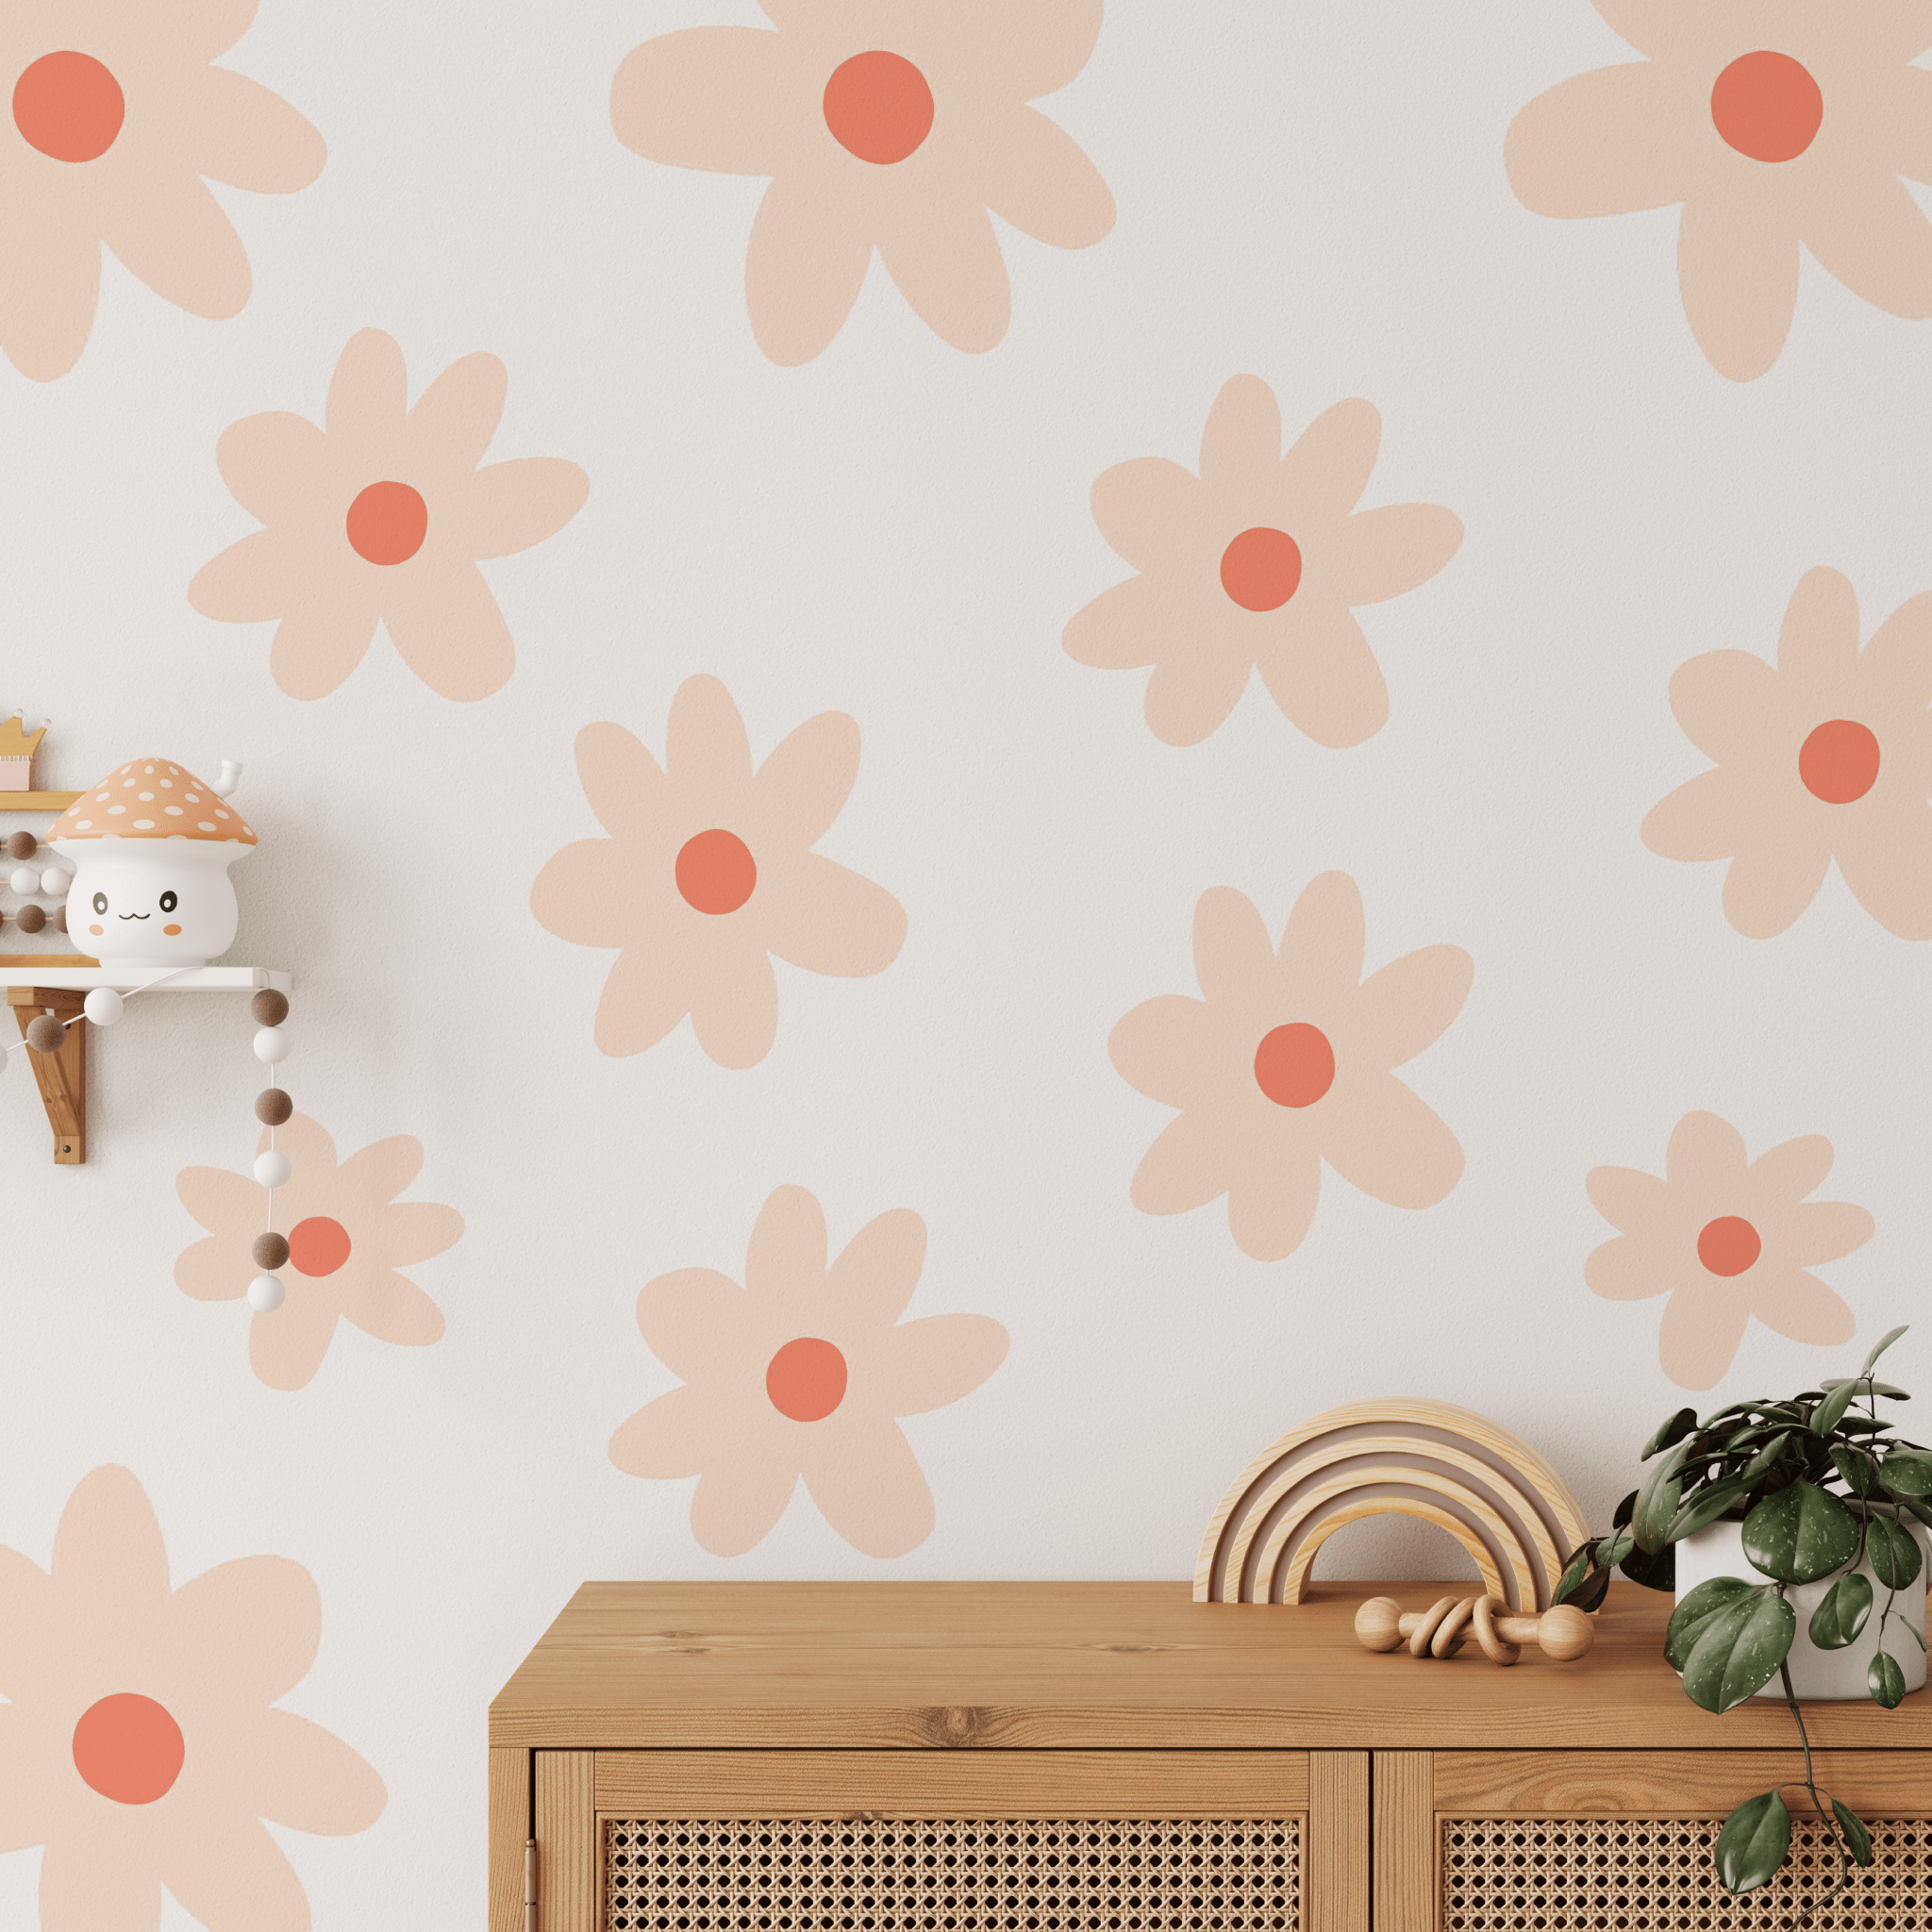 Large Daisy Floral wall stickers in a child's boho room